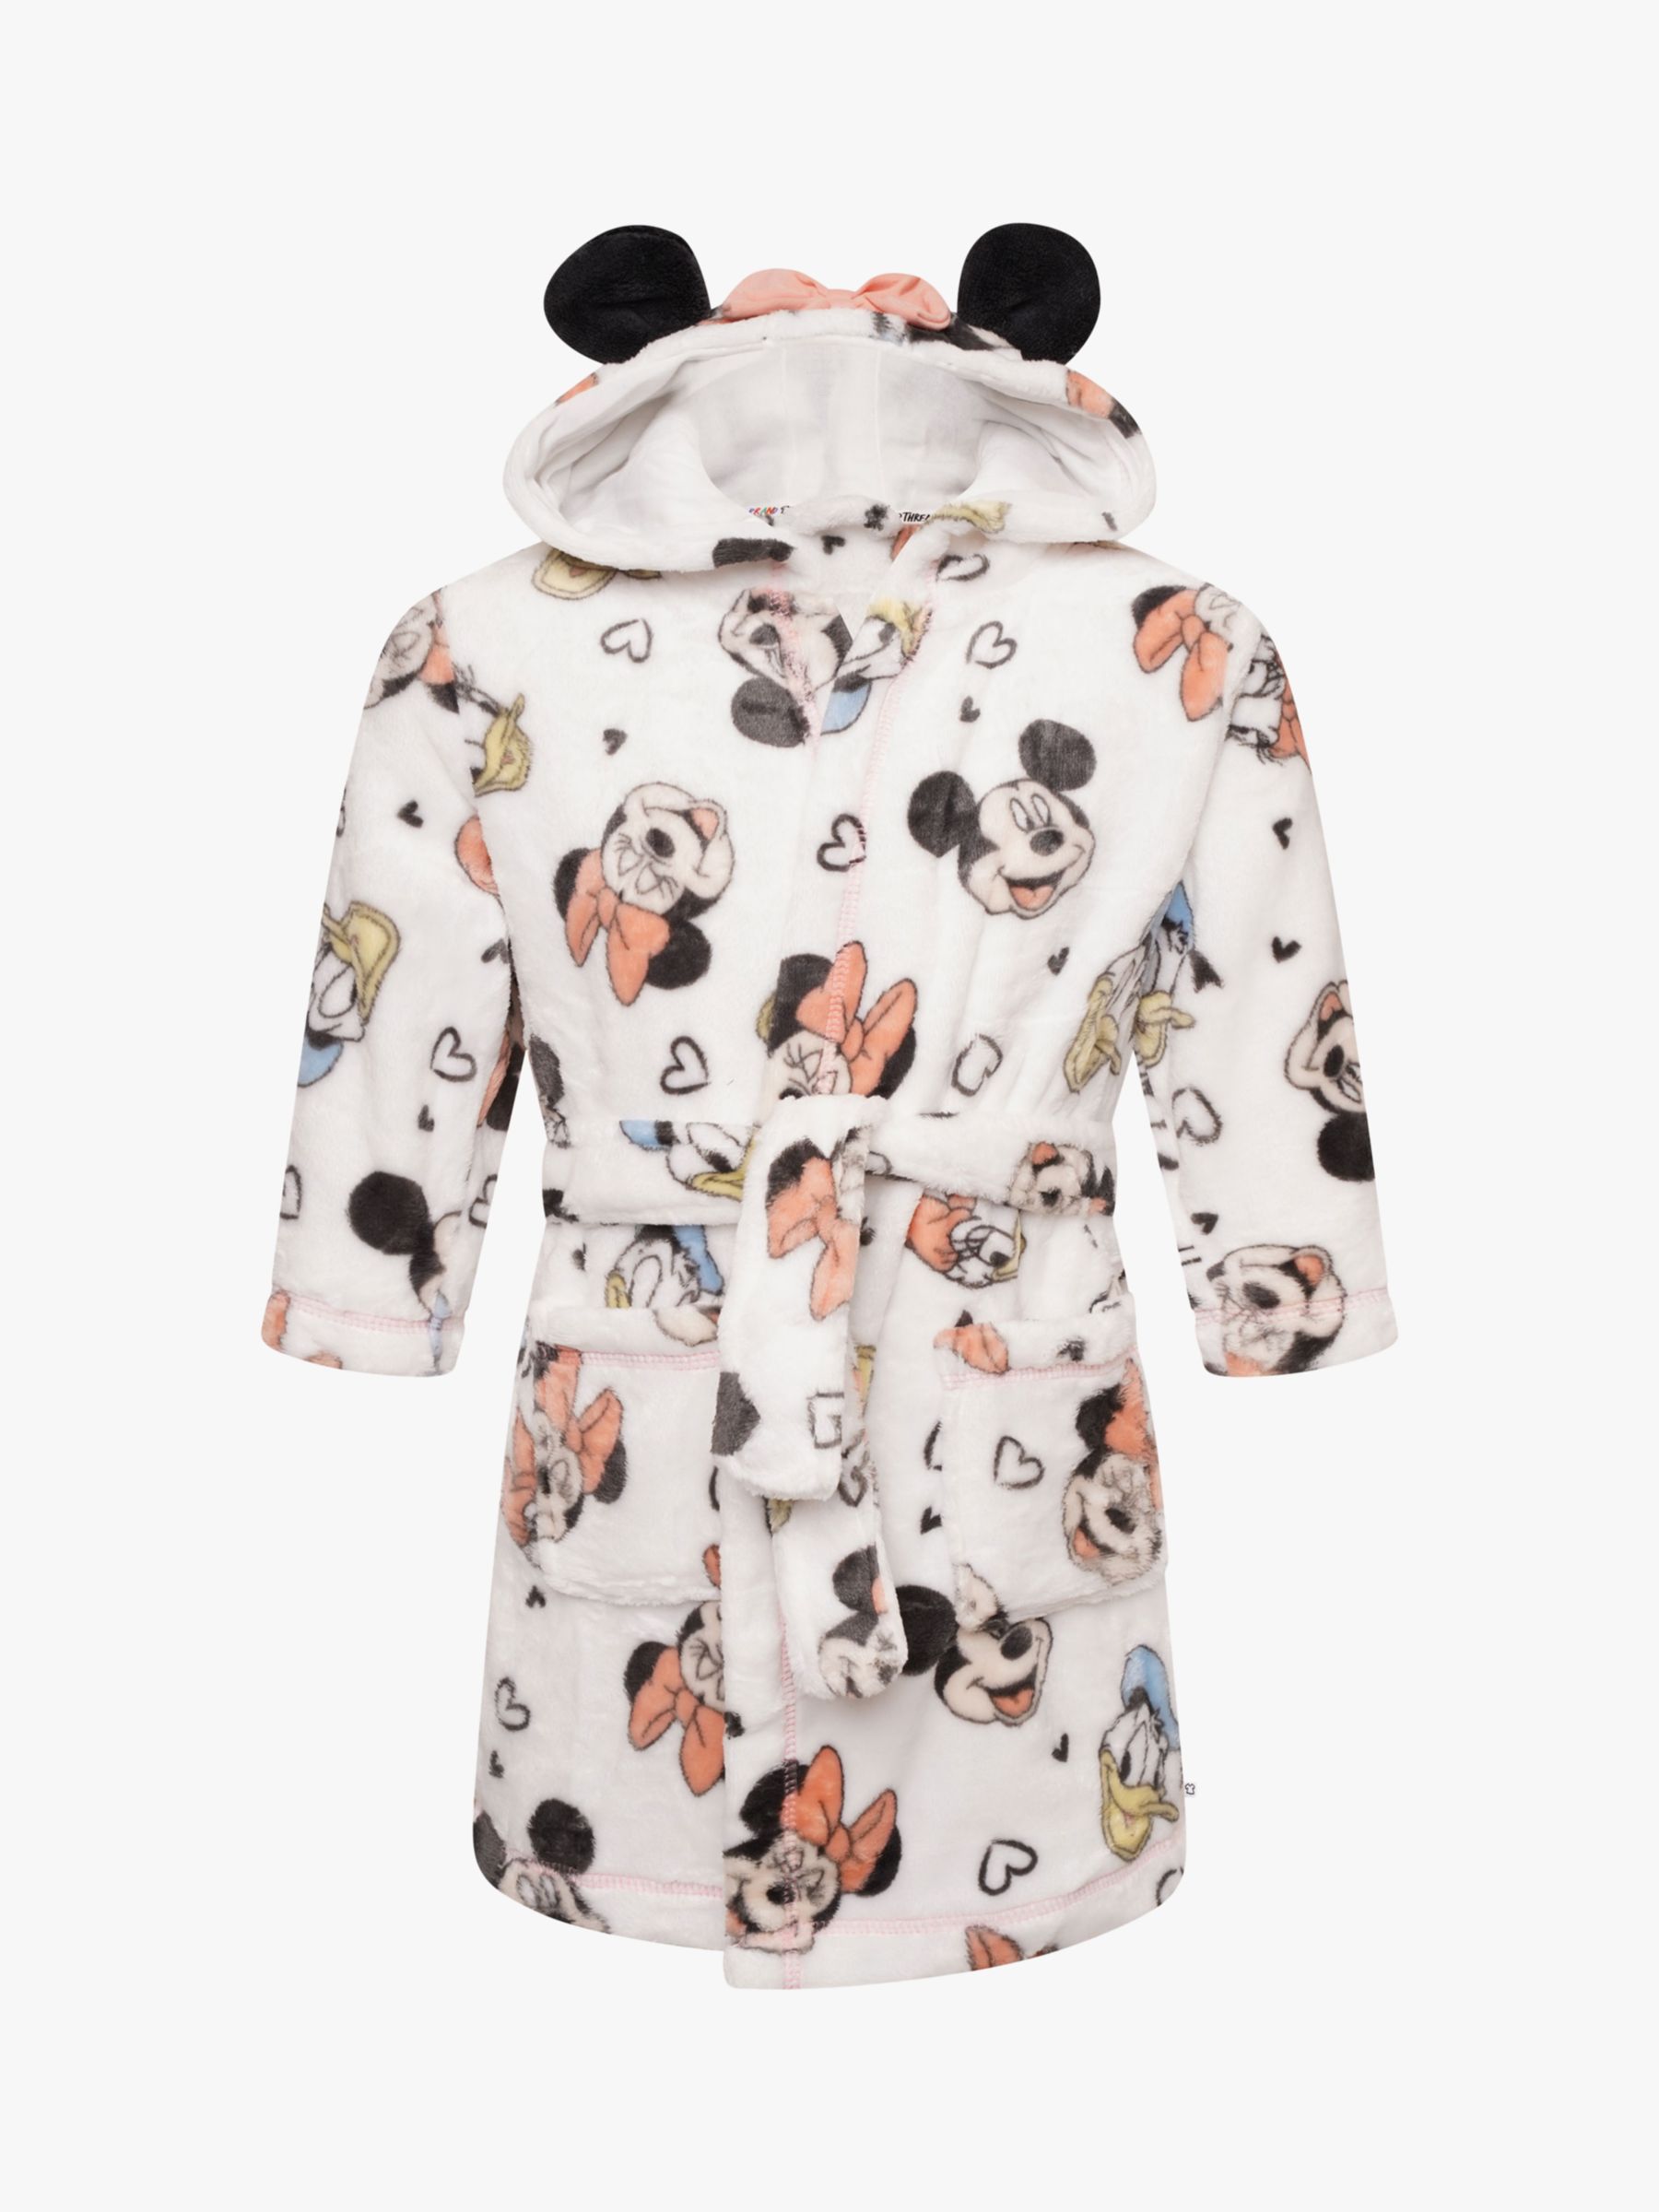 Buy Brand Threads Kids' Minnie Hooded Dressing Gown, Multi Online at johnlewis.com